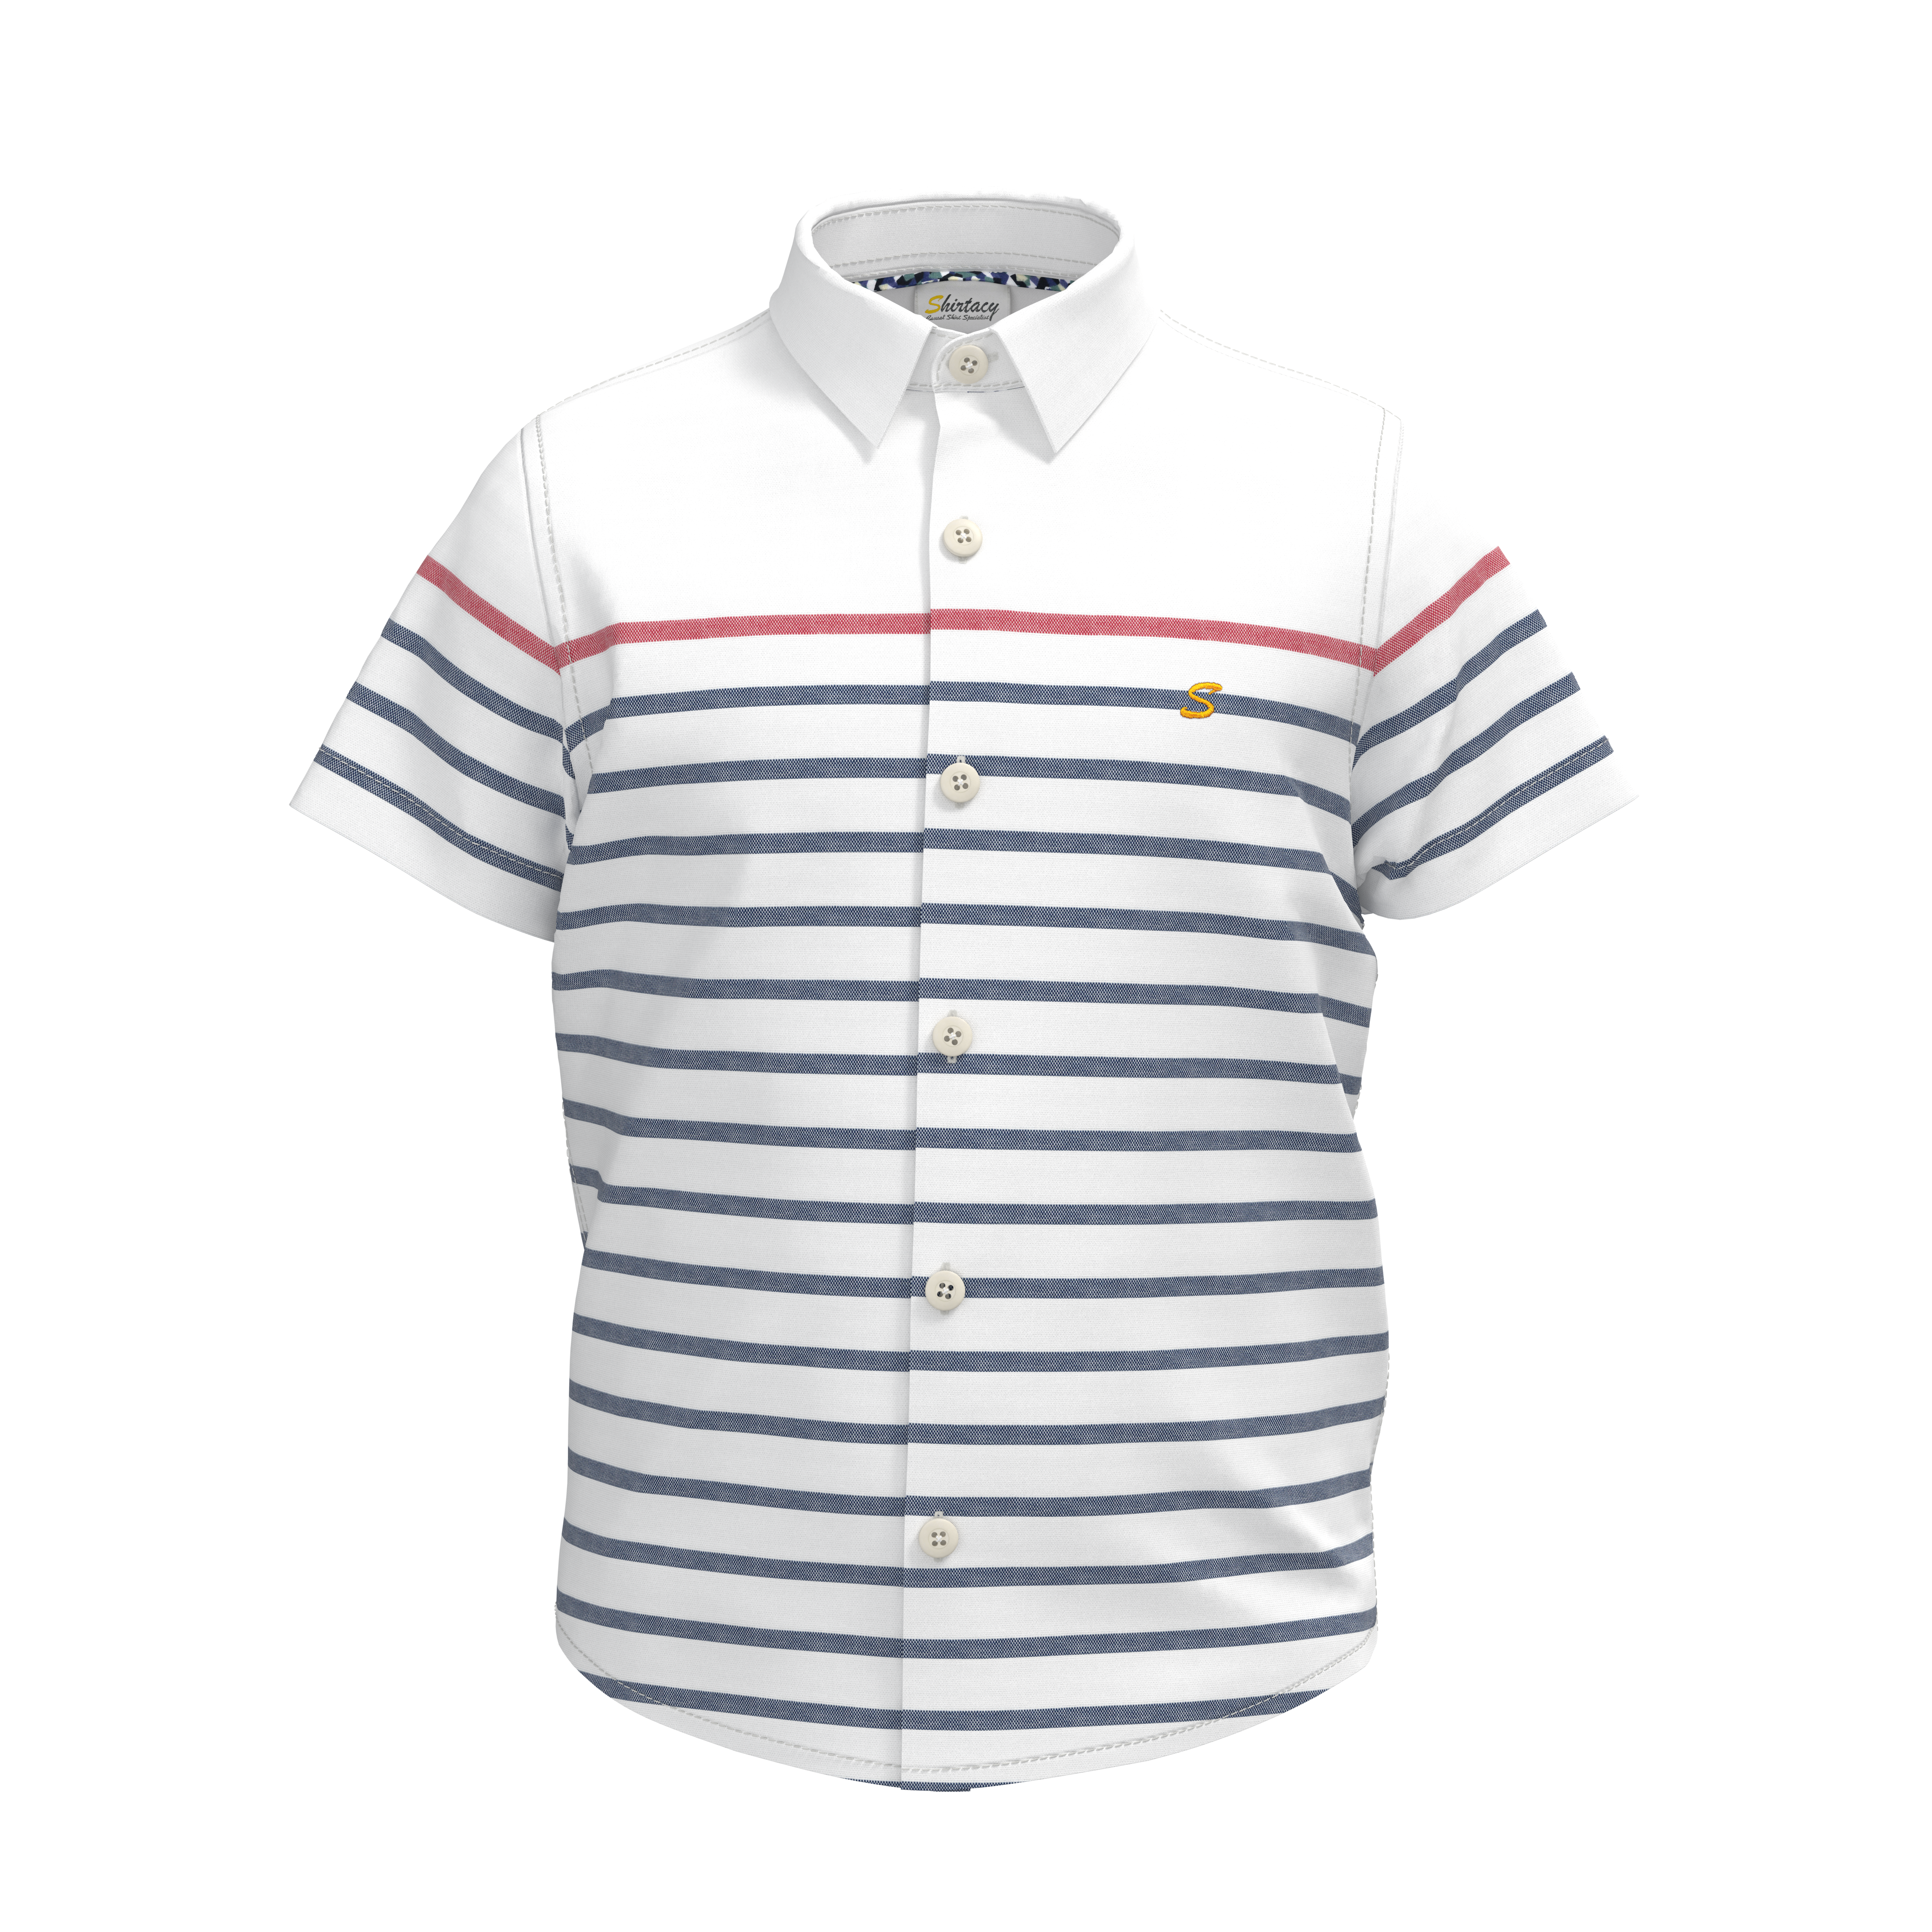 Placement Stripes Short Sleeves Short